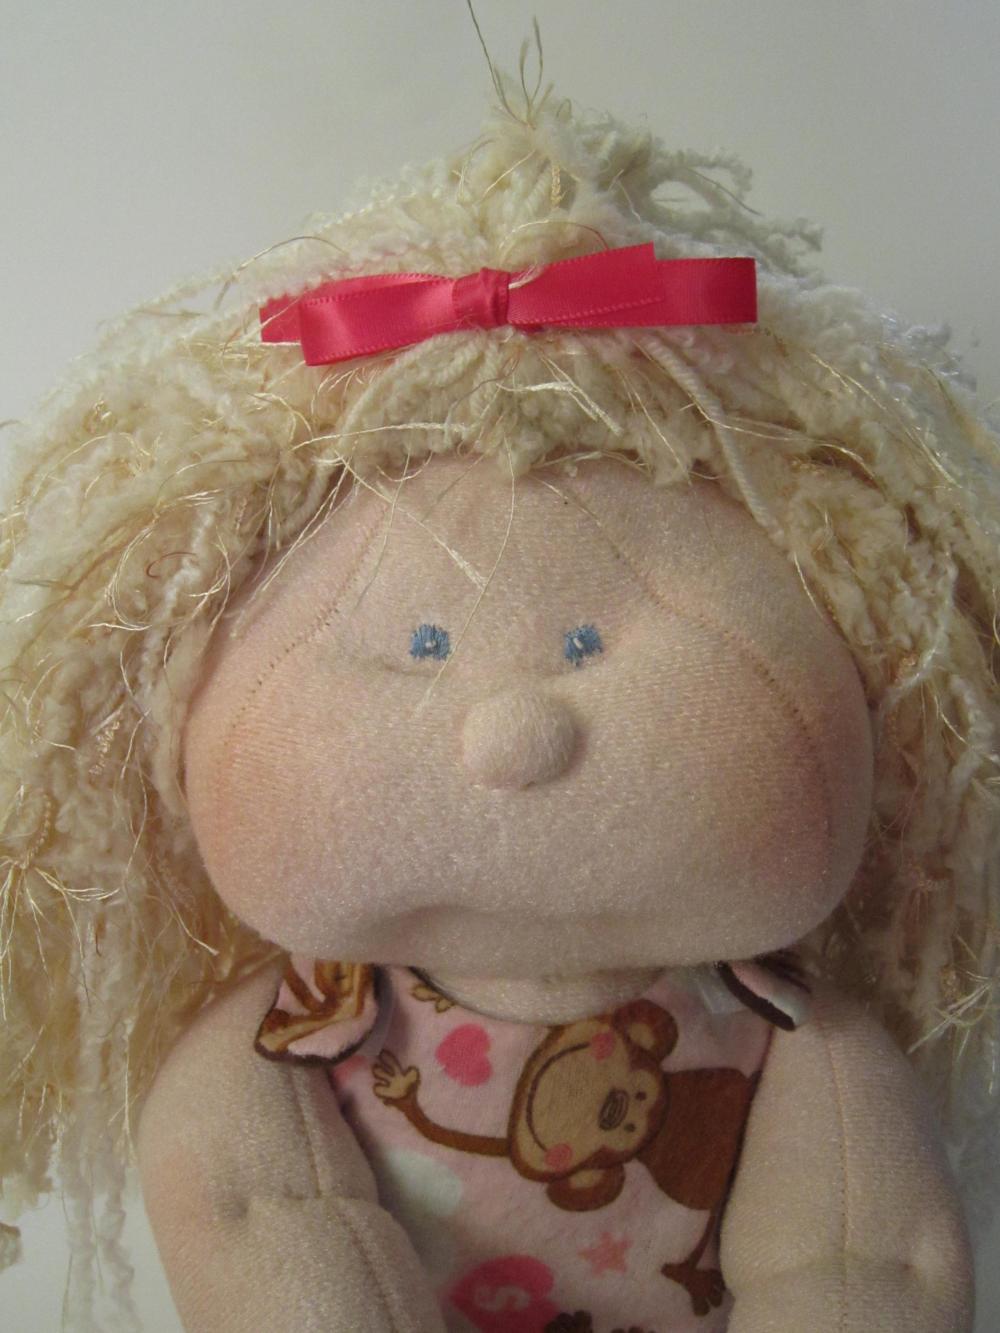 Dinky Baby, Baby Doll, Soft Cloth Doll, Handmade Baby Doll, Soft Sculpture Doll, Blonde Hair, Blue Eyes,